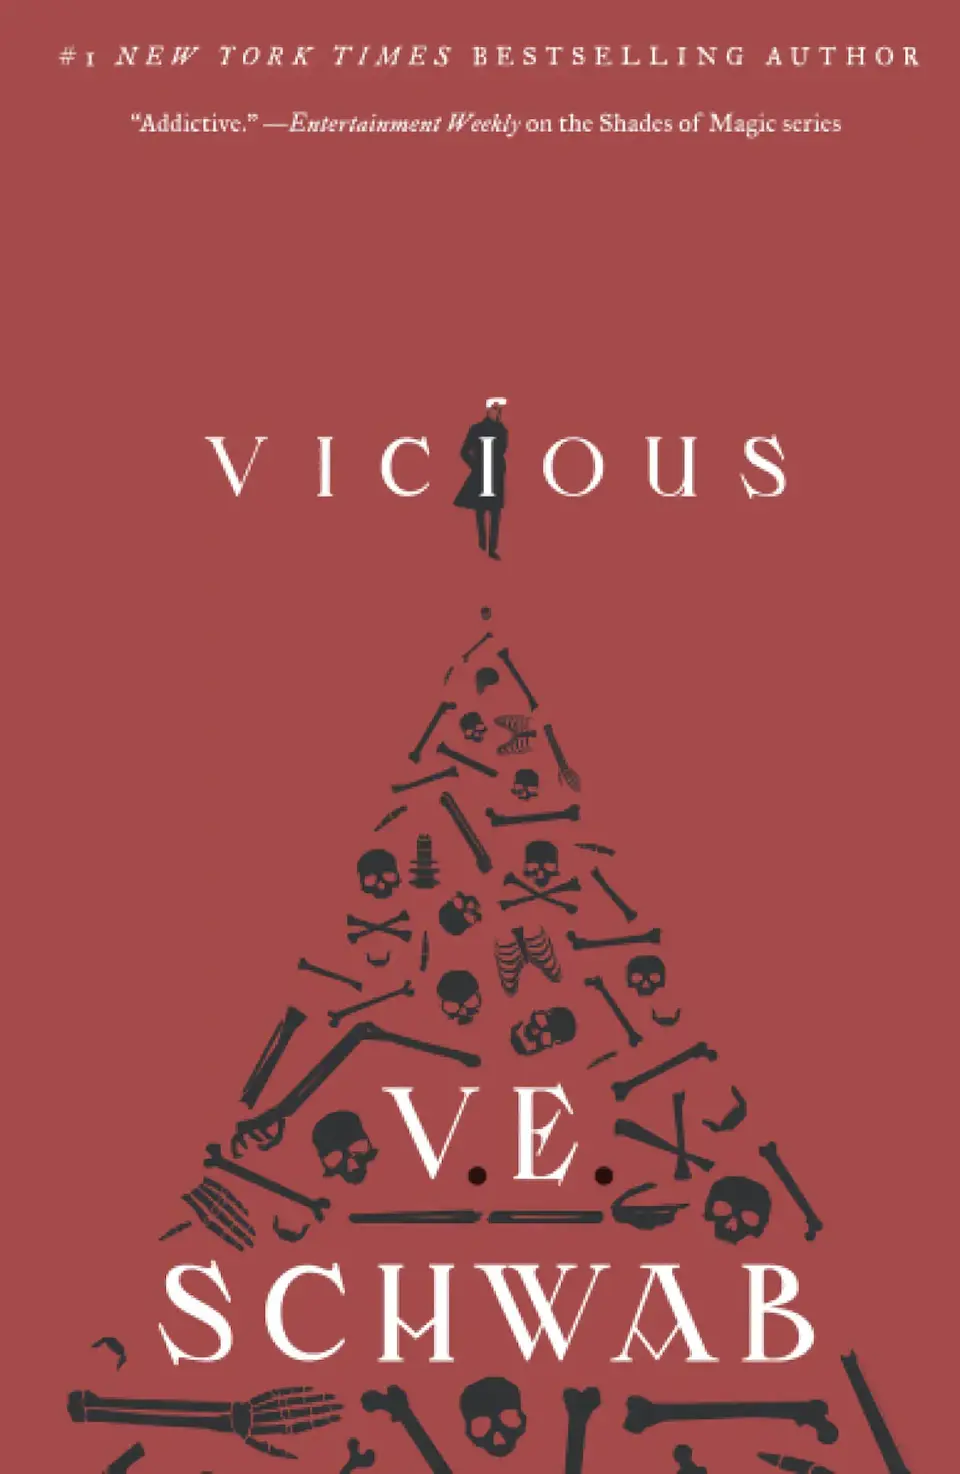 Vicious by V.E. Schwab finished on 2021 Dec 08